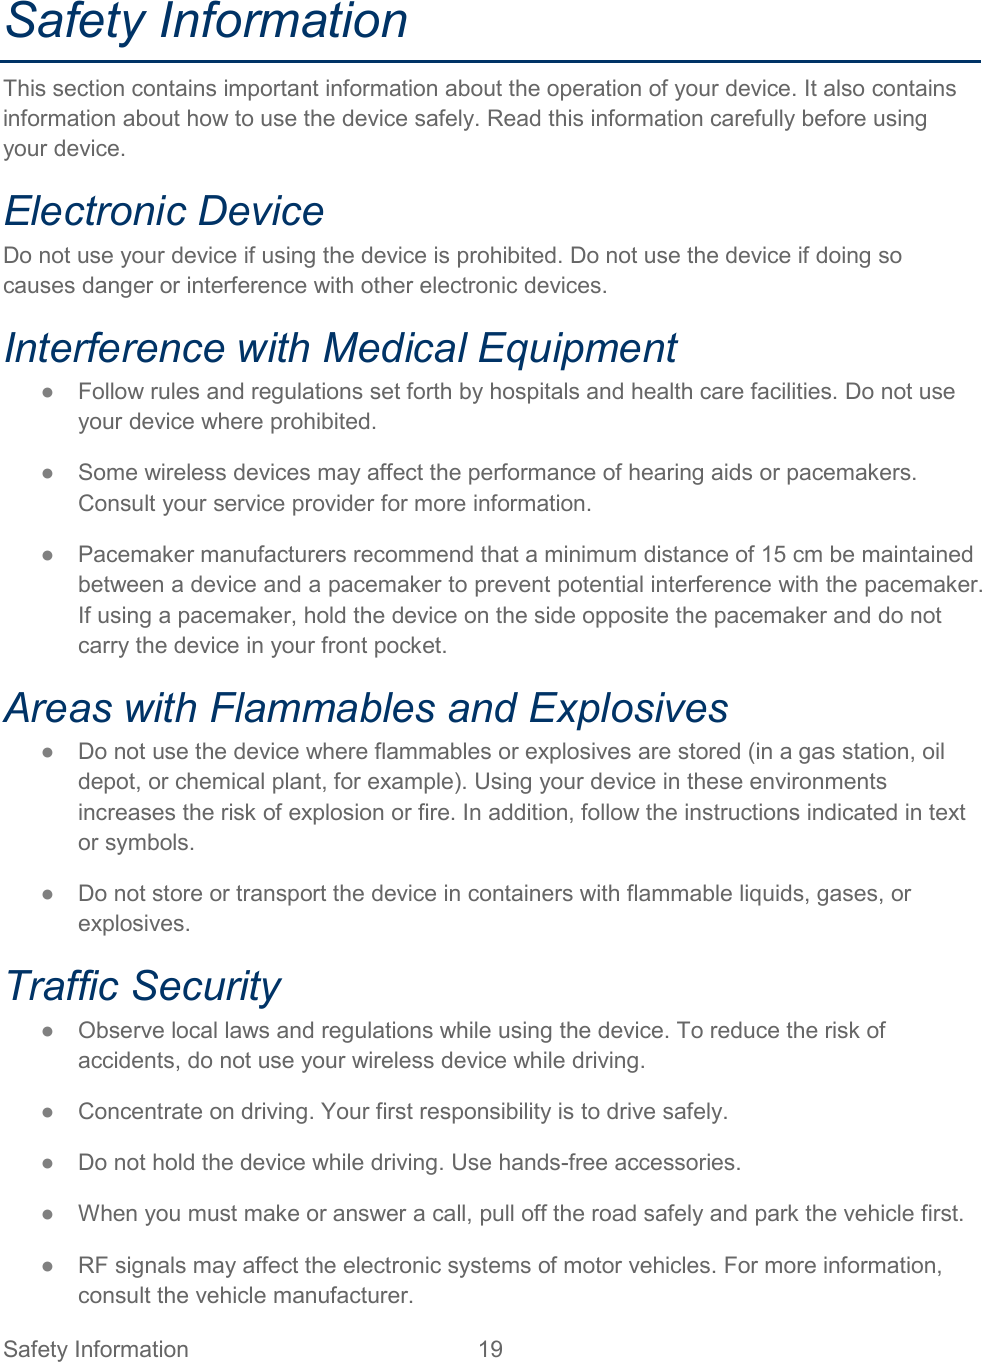 Safety Information 19   Safety Information This section contains important information about the operation of your device. It also contains information about how to use the device safely. Read this information carefully before using your device. Electronic Device Do not use your device if using the device is prohibited. Do not use the device if doing so causes danger or interference with other electronic devices. Interference with Medical Equipment ● Follow rules and regulations set forth by hospitals and health care facilities. Do not use your device where prohibited. ● Some wireless devices may affect the performance of hearing aids or pacemakers. Consult your service provider for more information. ● Pacemaker manufacturers recommend that a minimum distance of 15 cm be maintained between a device and a pacemaker to prevent potential interference with the pacemaker. If using a pacemaker, hold the device on the side opposite the pacemaker and do not carry the device in your front pocket. Areas with Flammables and Explosives ● Do not use the device where flammables or explosives are stored (in a gas station, oil depot, or chemical plant, for example). Using your device in these environments increases the risk of explosion or fire. In addition, follow the instructions indicated in text or symbols. ● Do not store or transport the device in containers with flammable liquids, gases, or explosives. Traffic Security ● Observe local laws and regulations while using the device. To reduce the risk of accidents, do not use your wireless device while driving. ● Concentrate on driving. Your first responsibility is to drive safely. ● Do not hold the device while driving. Use hands-free accessories. ● When you must make or answer a call, pull off the road safely and park the vehicle first.  ● RF signals may affect the electronic systems of motor vehicles. For more information, consult the vehicle manufacturer. 